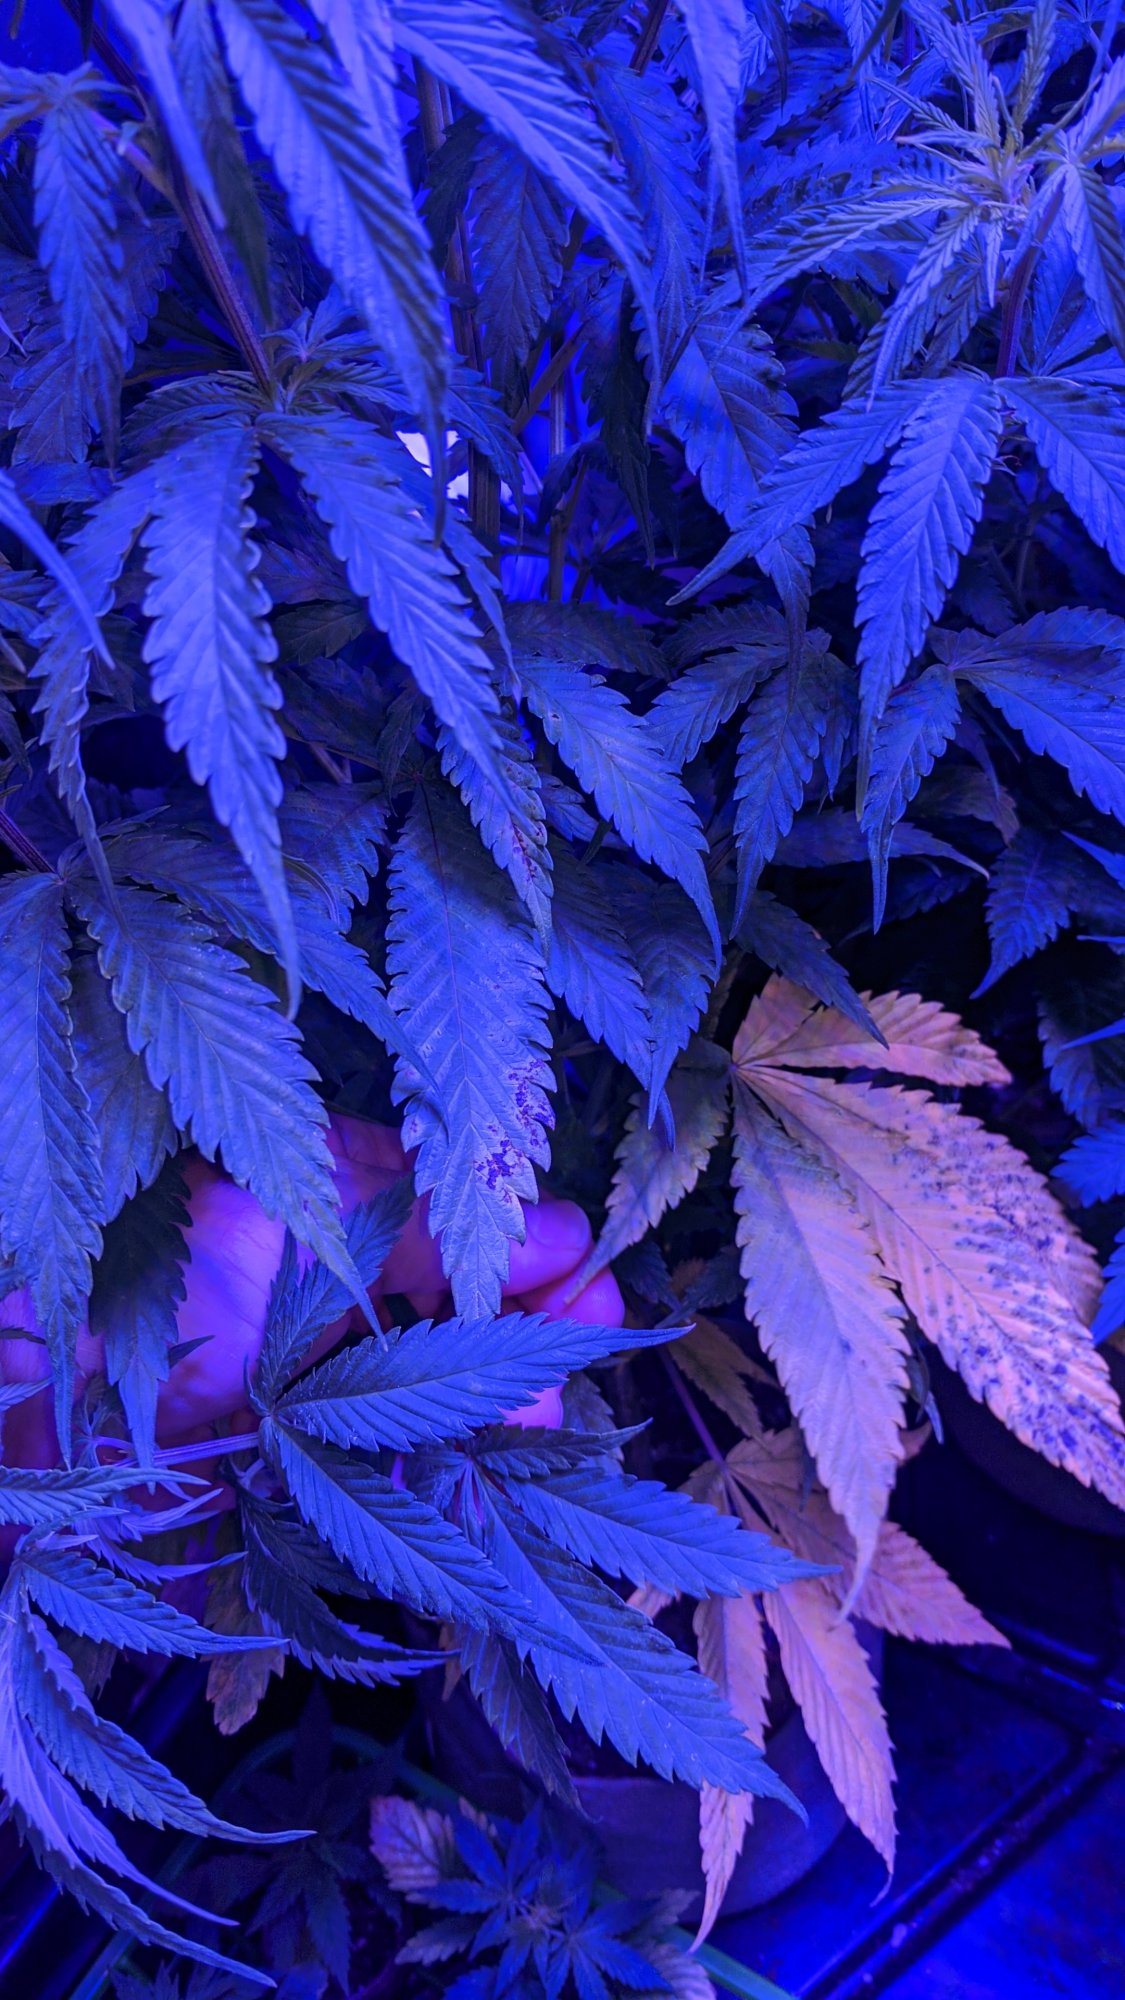 Diagnosis please  lack of light nutes  overwatering  stress whats going on here 2